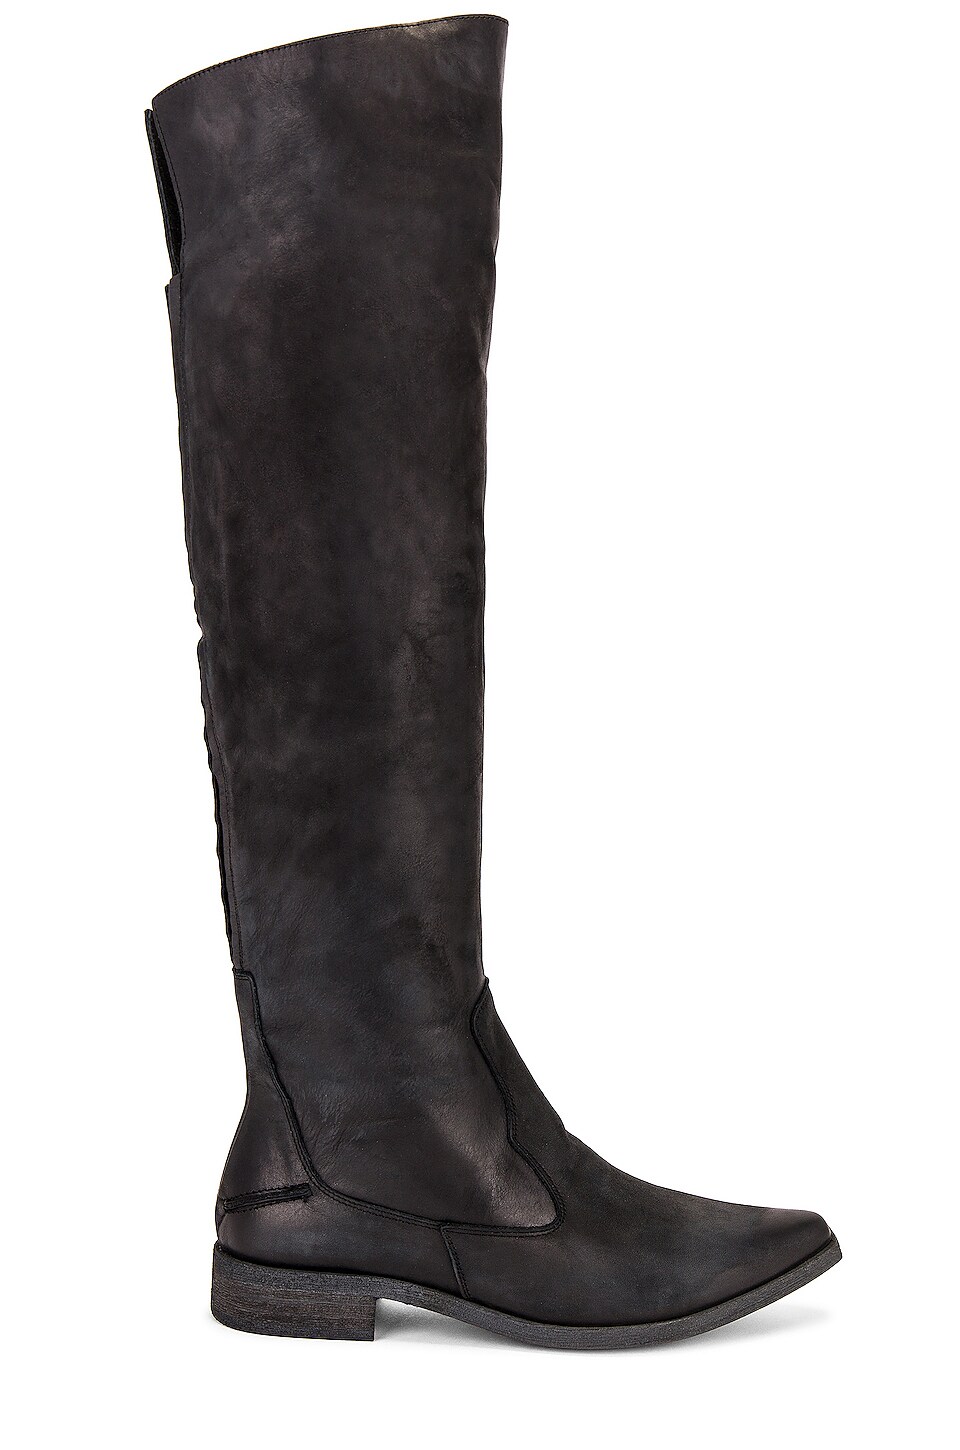 Free People Brenna Over The Knee Boot Black